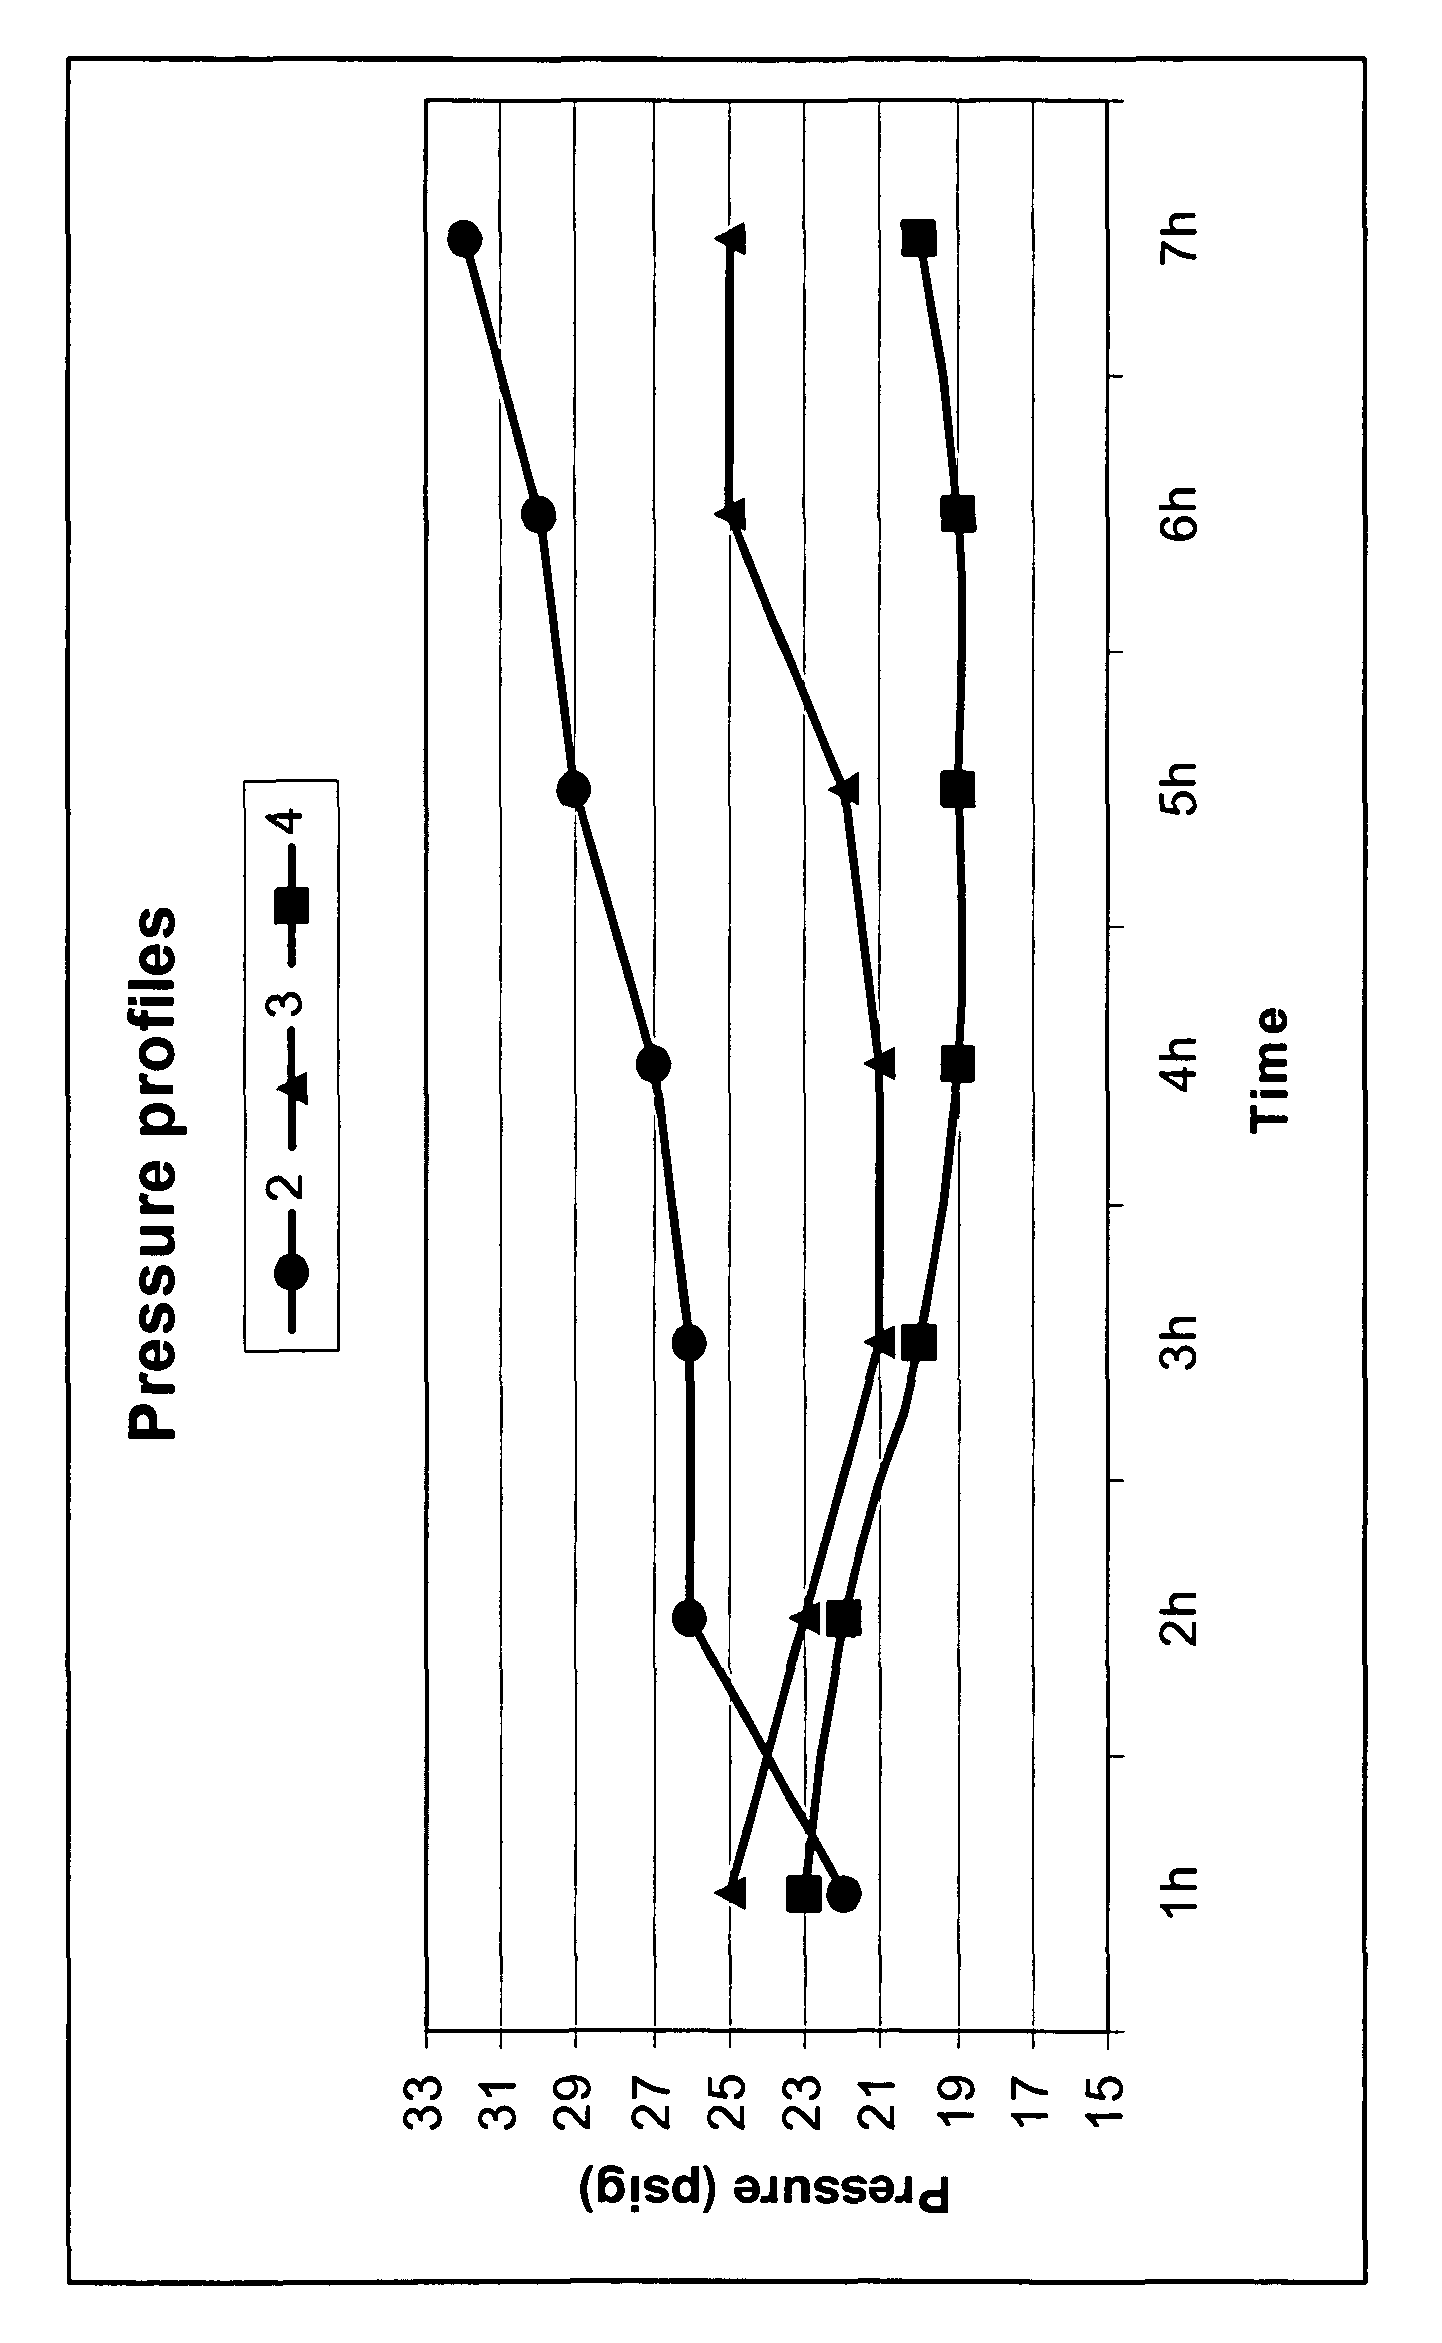 Process for reacting an α, β-unsaturated dicarboxylic acid compound with an ethylenically unsaturated hydrocarbon